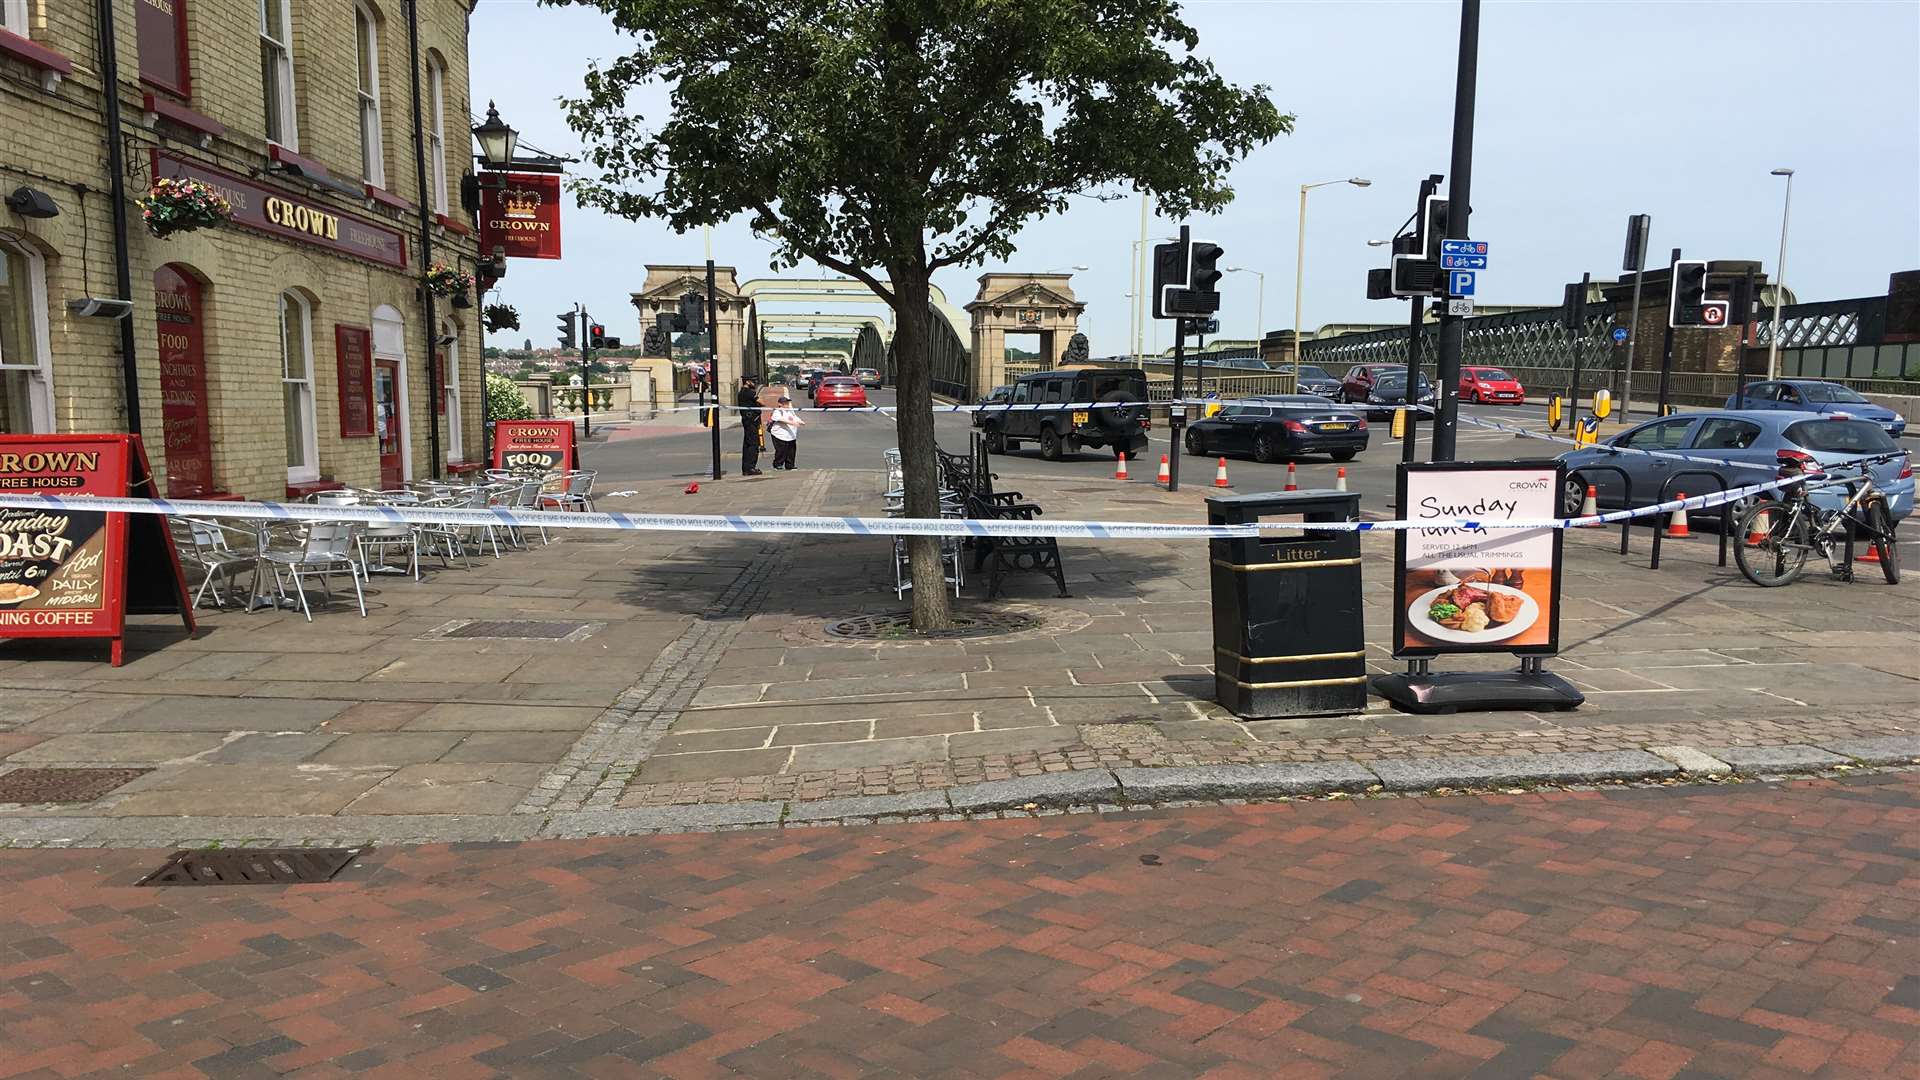 The area was cordoned off outside The Crown pub after the incident.